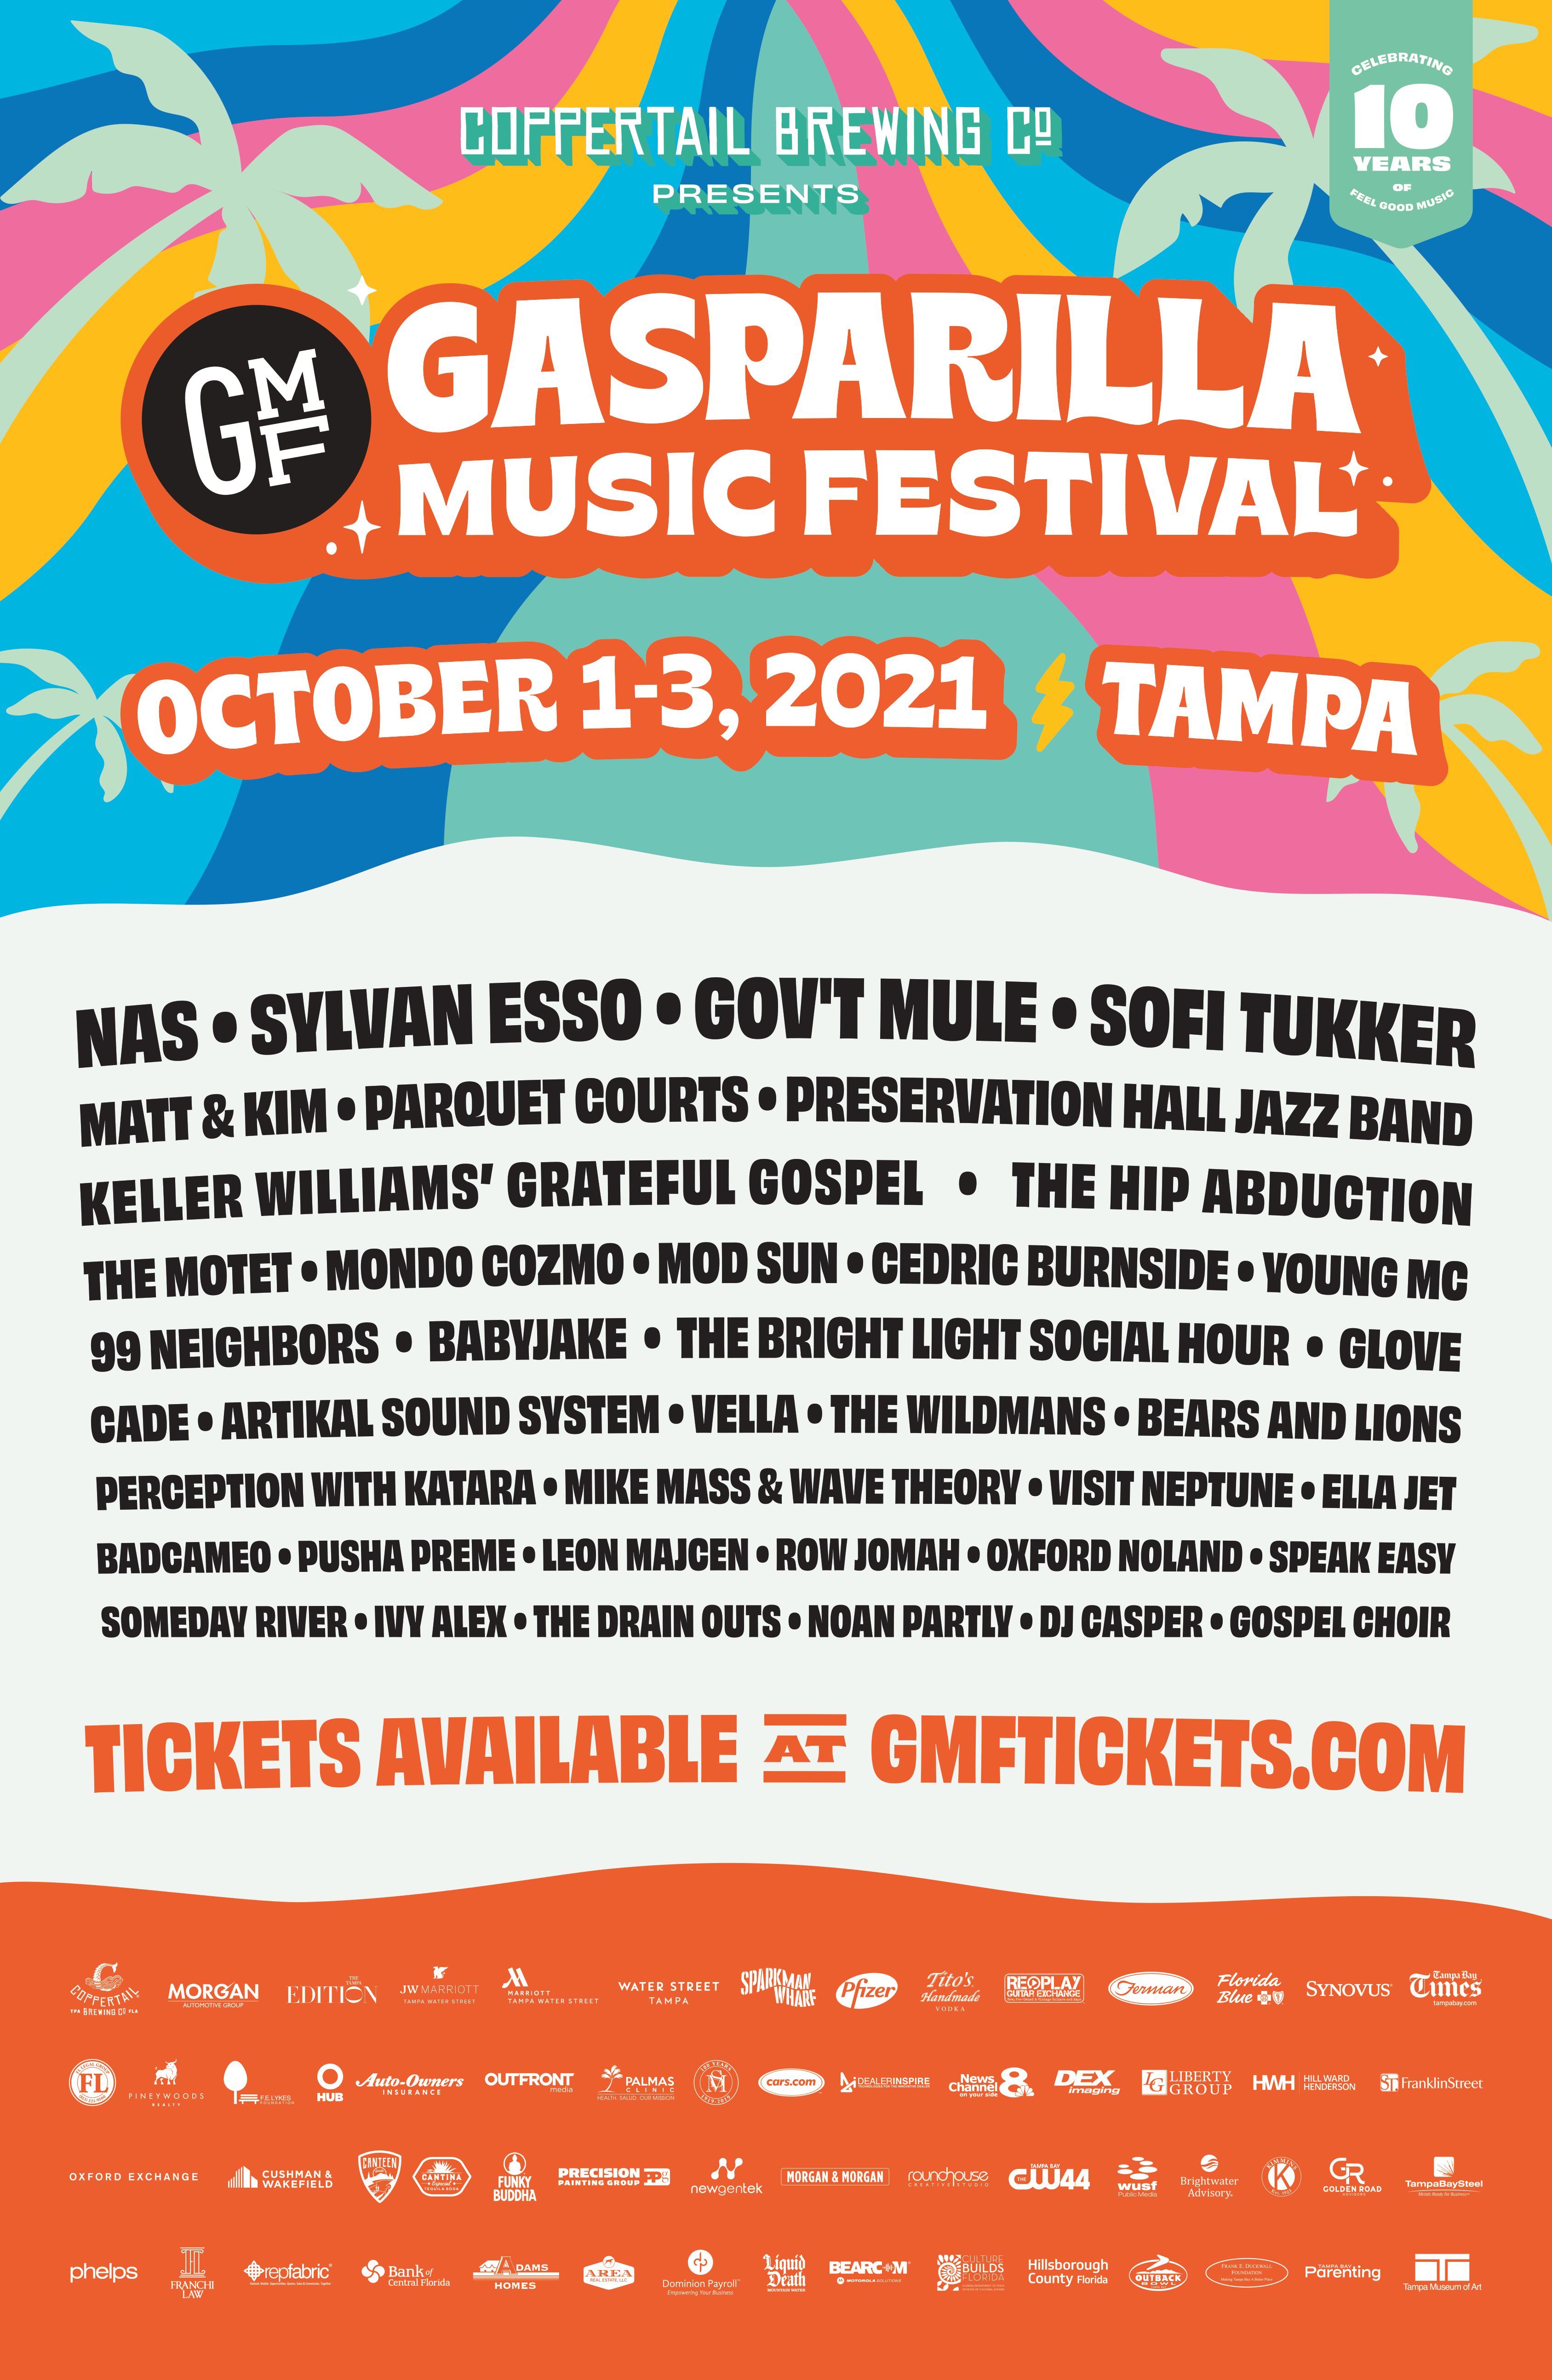 Gasparilla Music Festival Takes Over Downtown Tampa This Weekend!